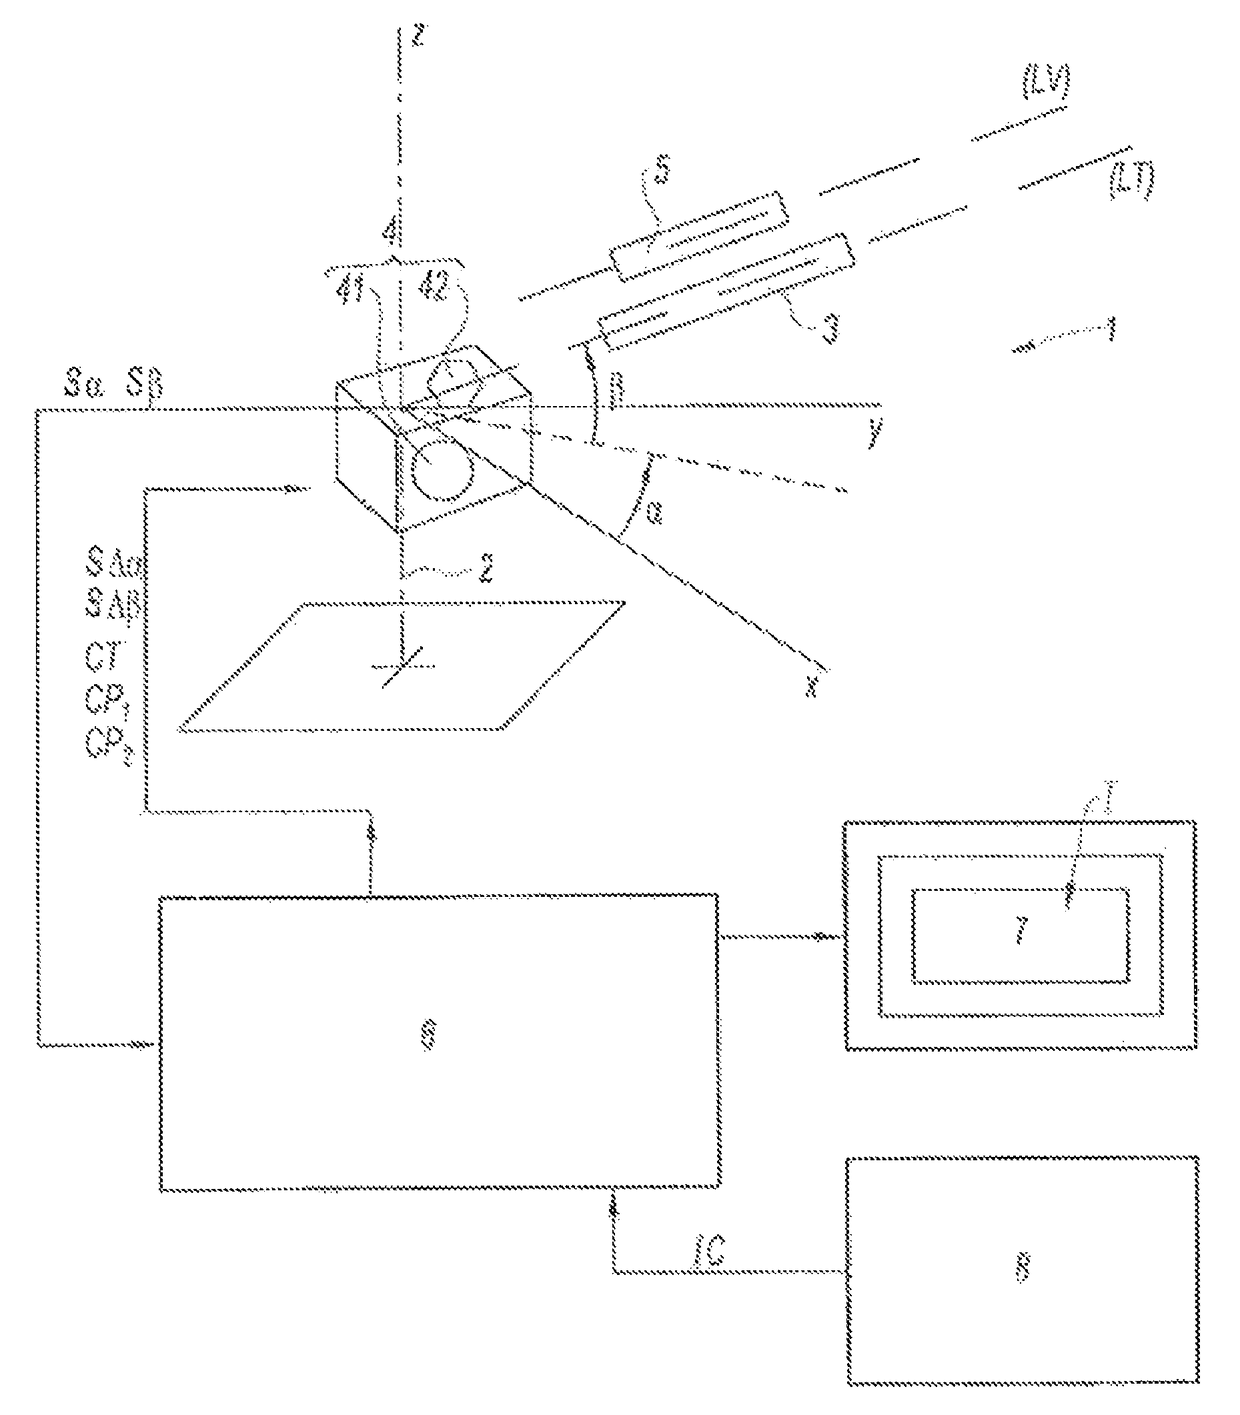 Remotely operated target-processing system